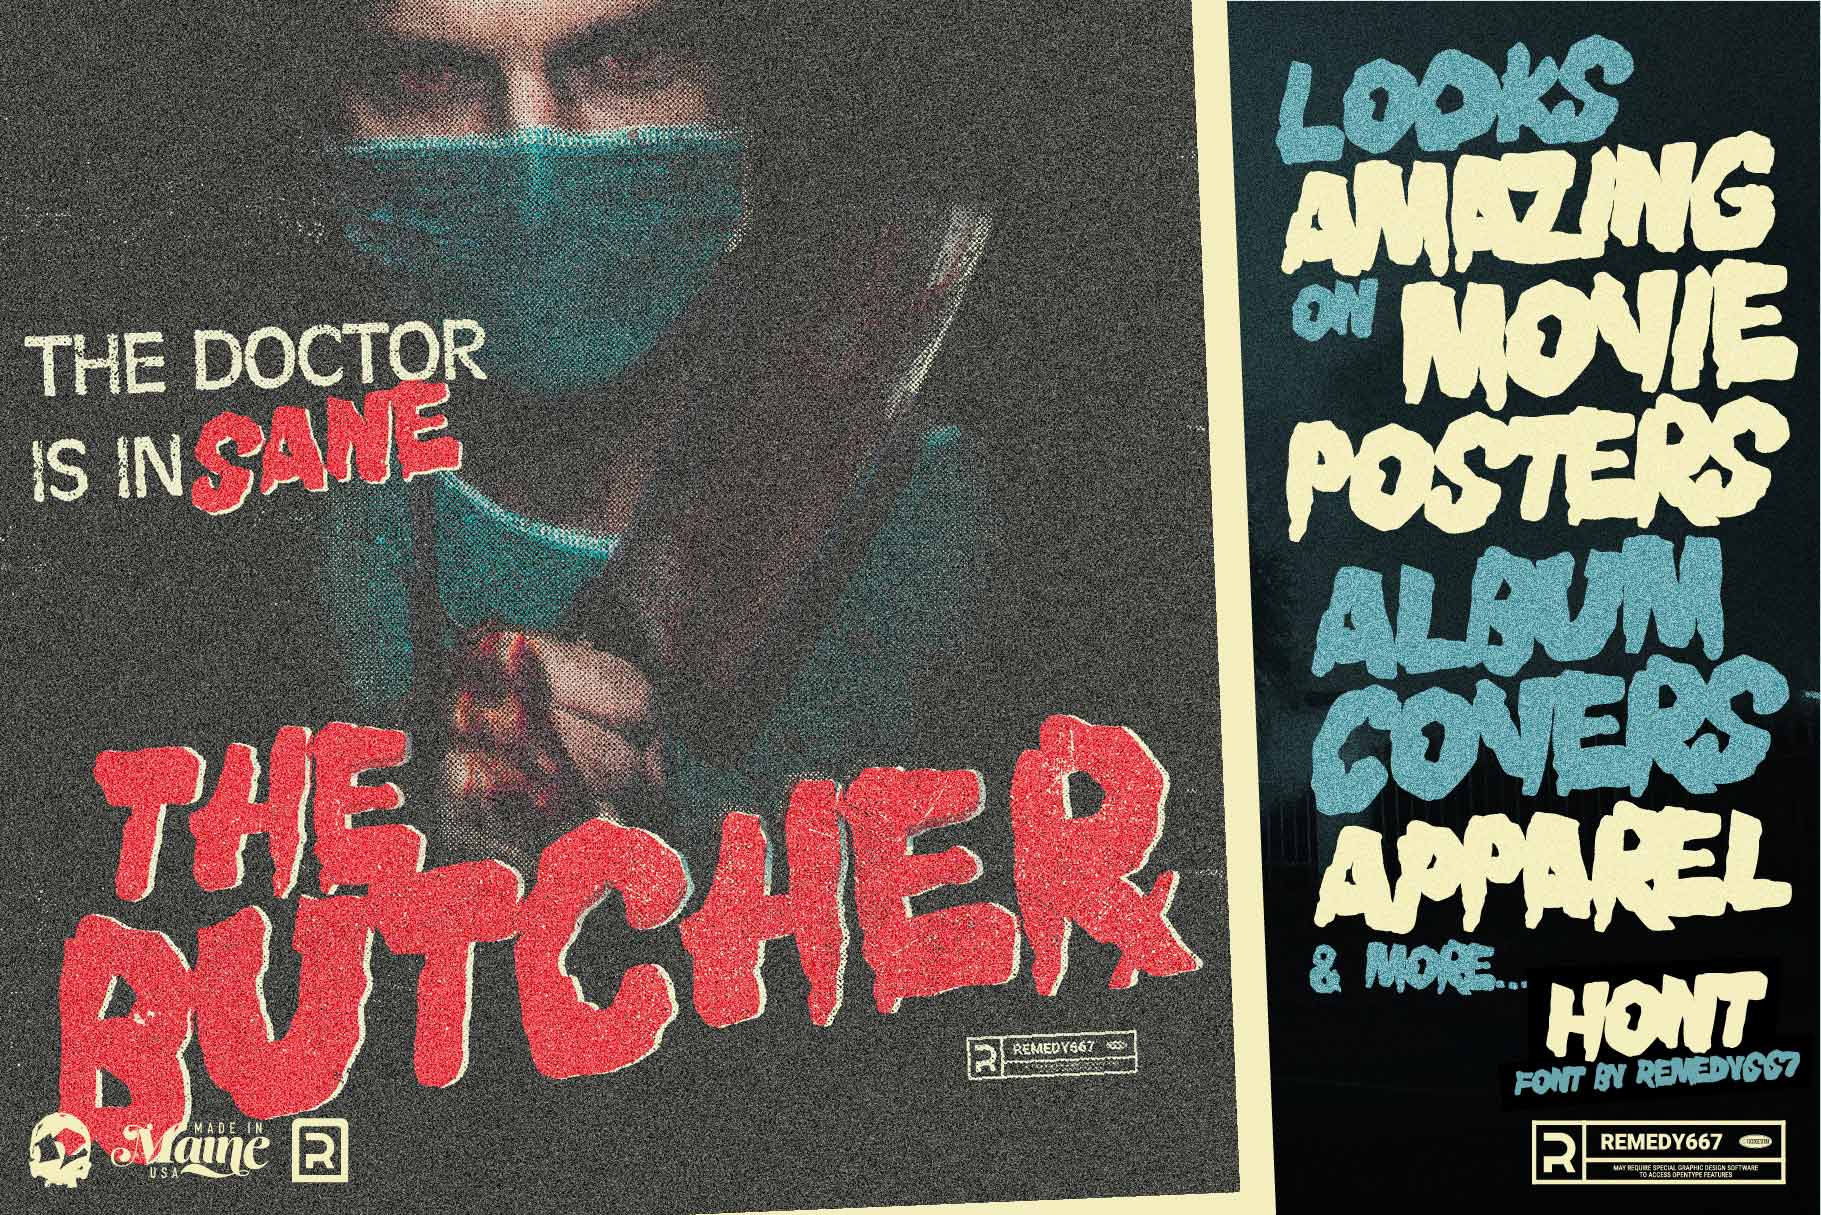 Textured vintage horror font for movie posters, album covers, and apparel | RetroSupply Co.